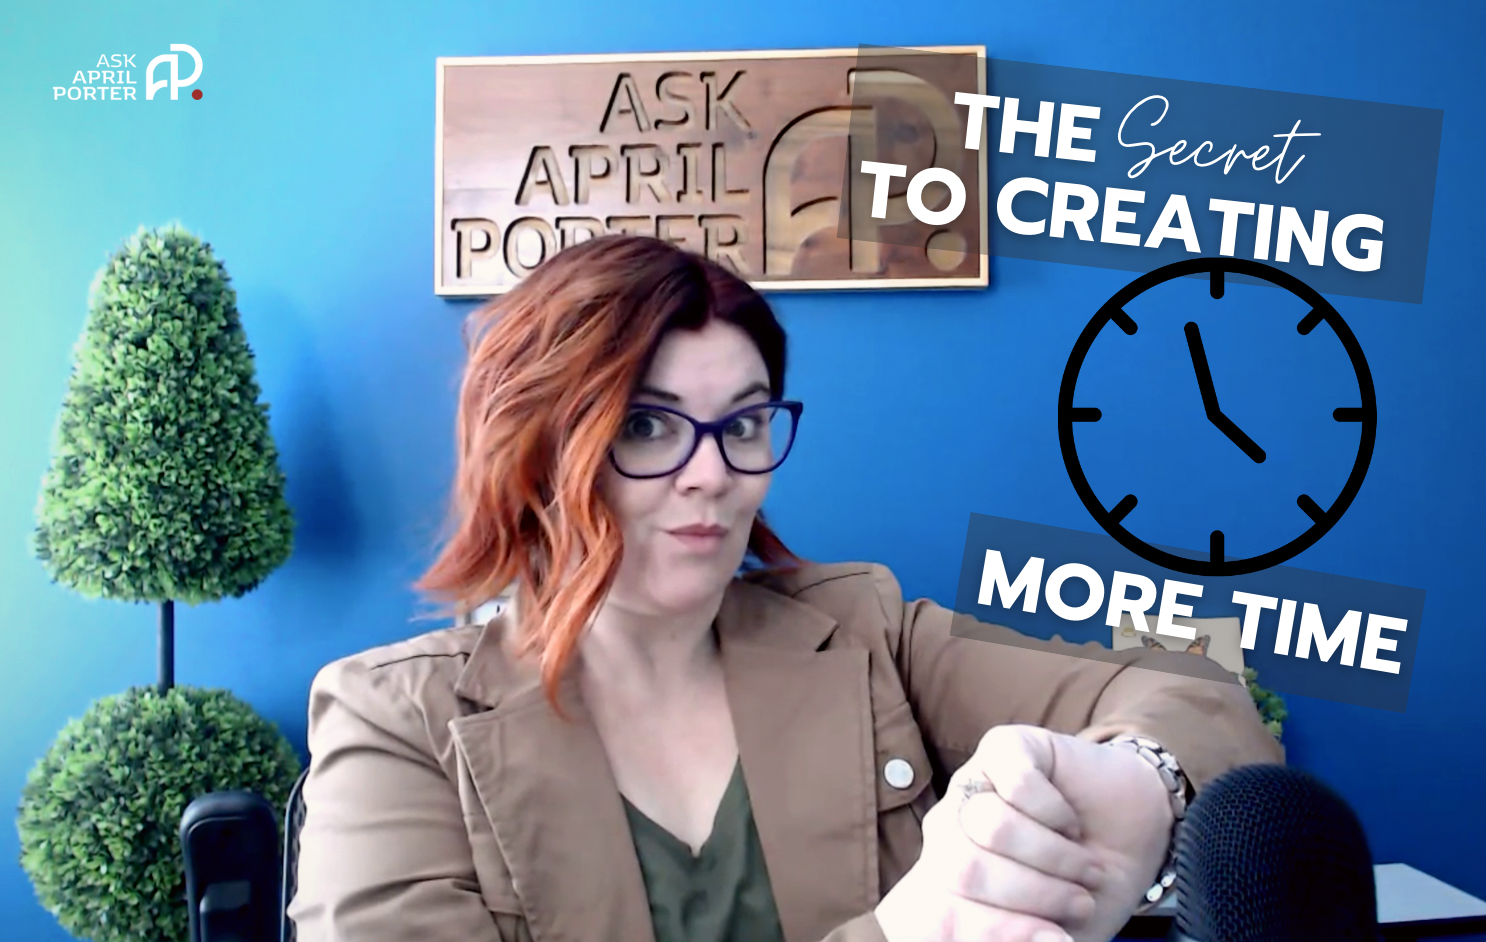 The Secret to Creating More Time